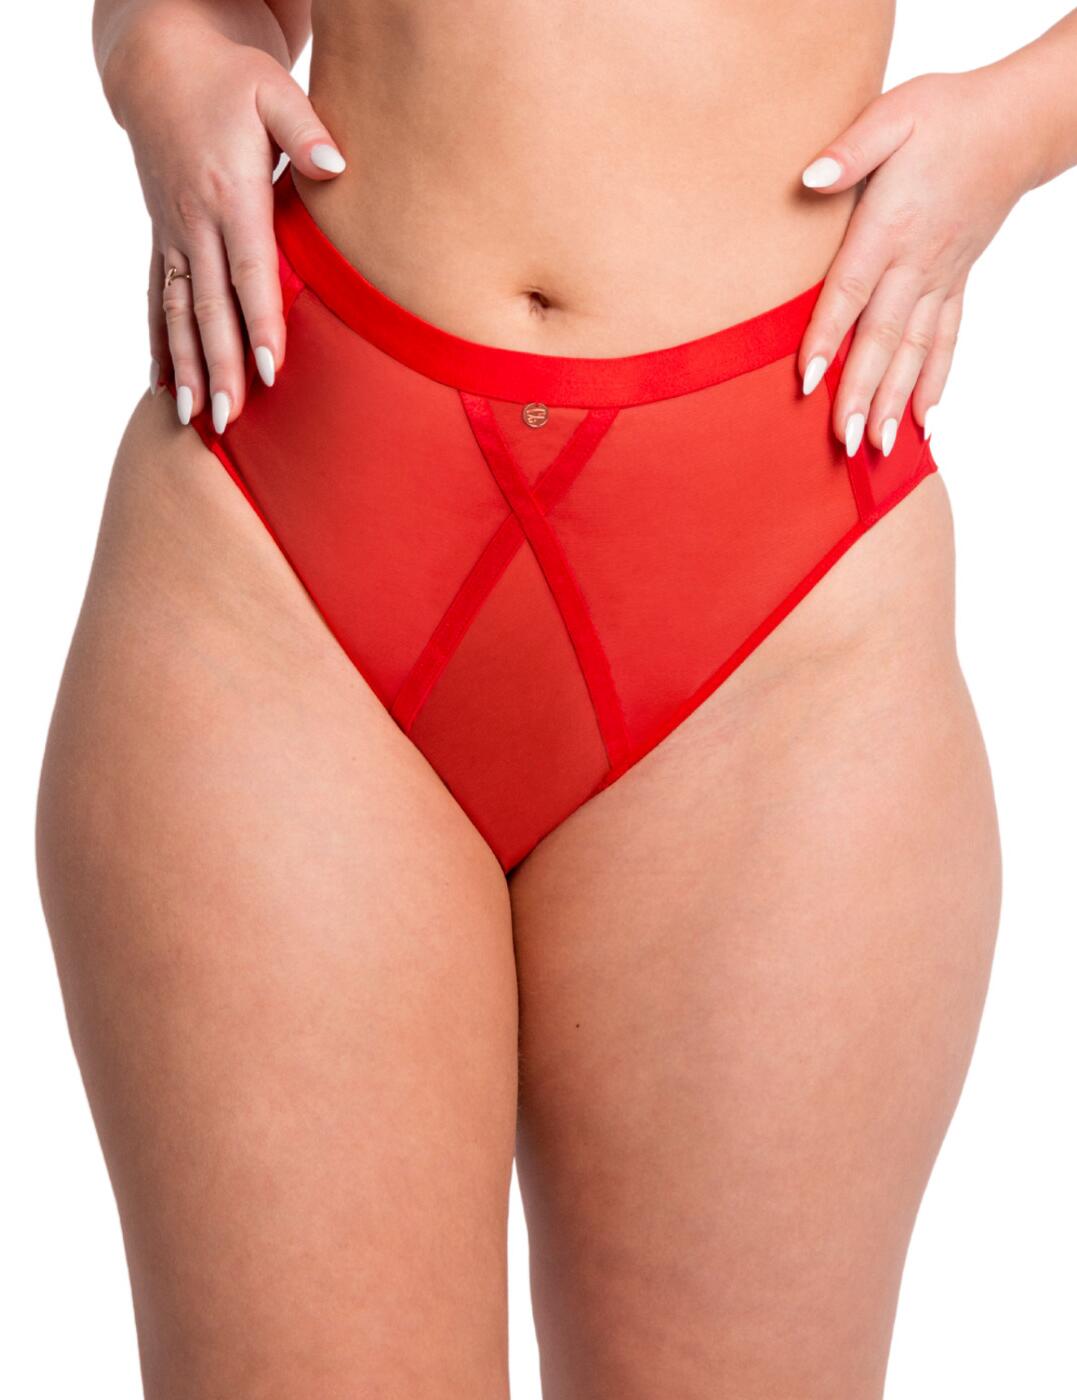 ST013208 Scantilly by Curvy Kate Sheer Chic High Waist Brief - ST013208 Flame Red